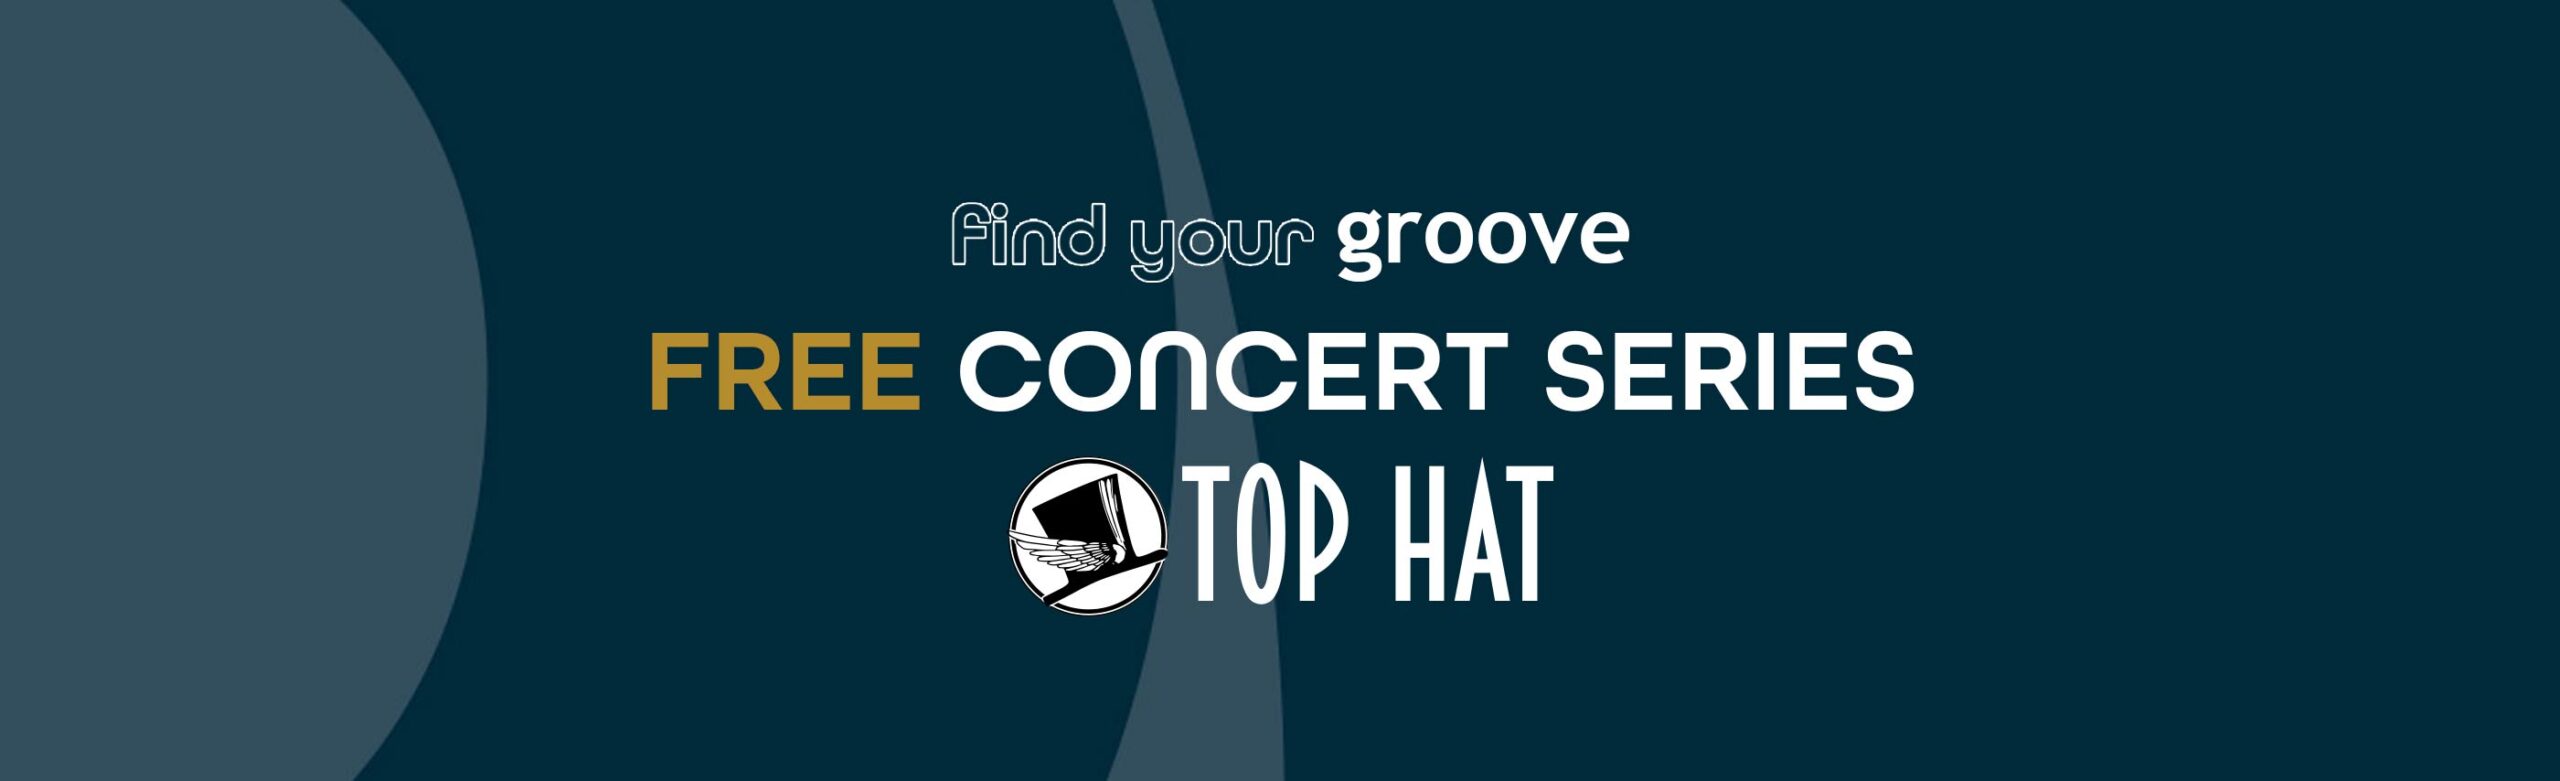 Find Your Groove Free Concert Series – Missoula